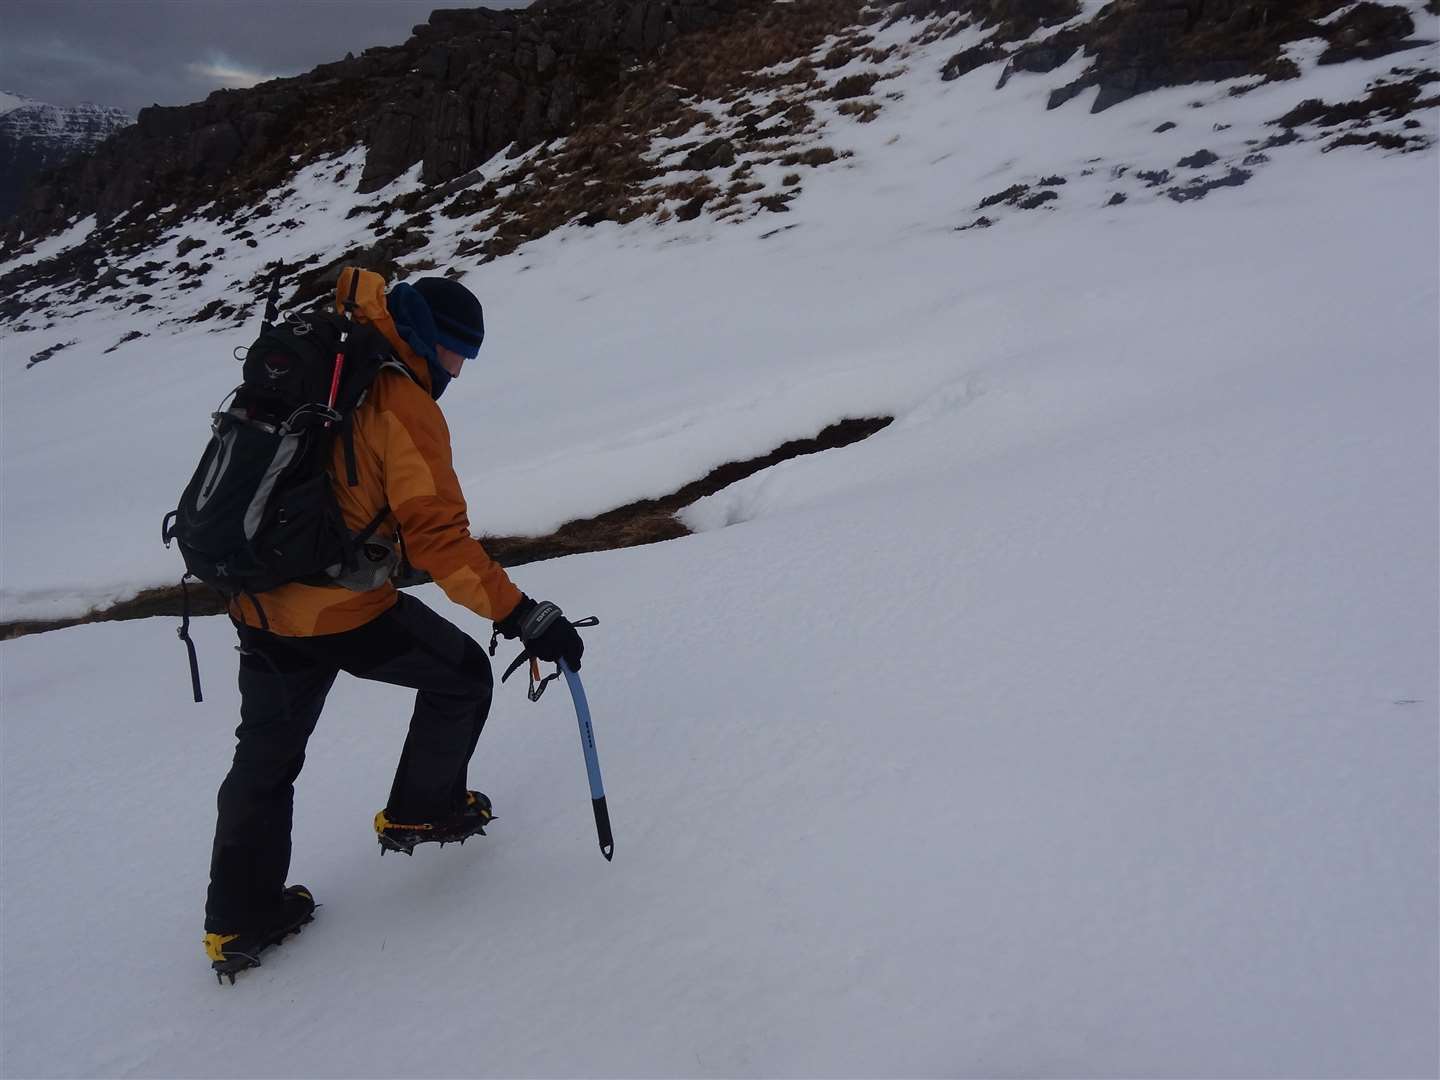 Peter using his ice axe and crampons.